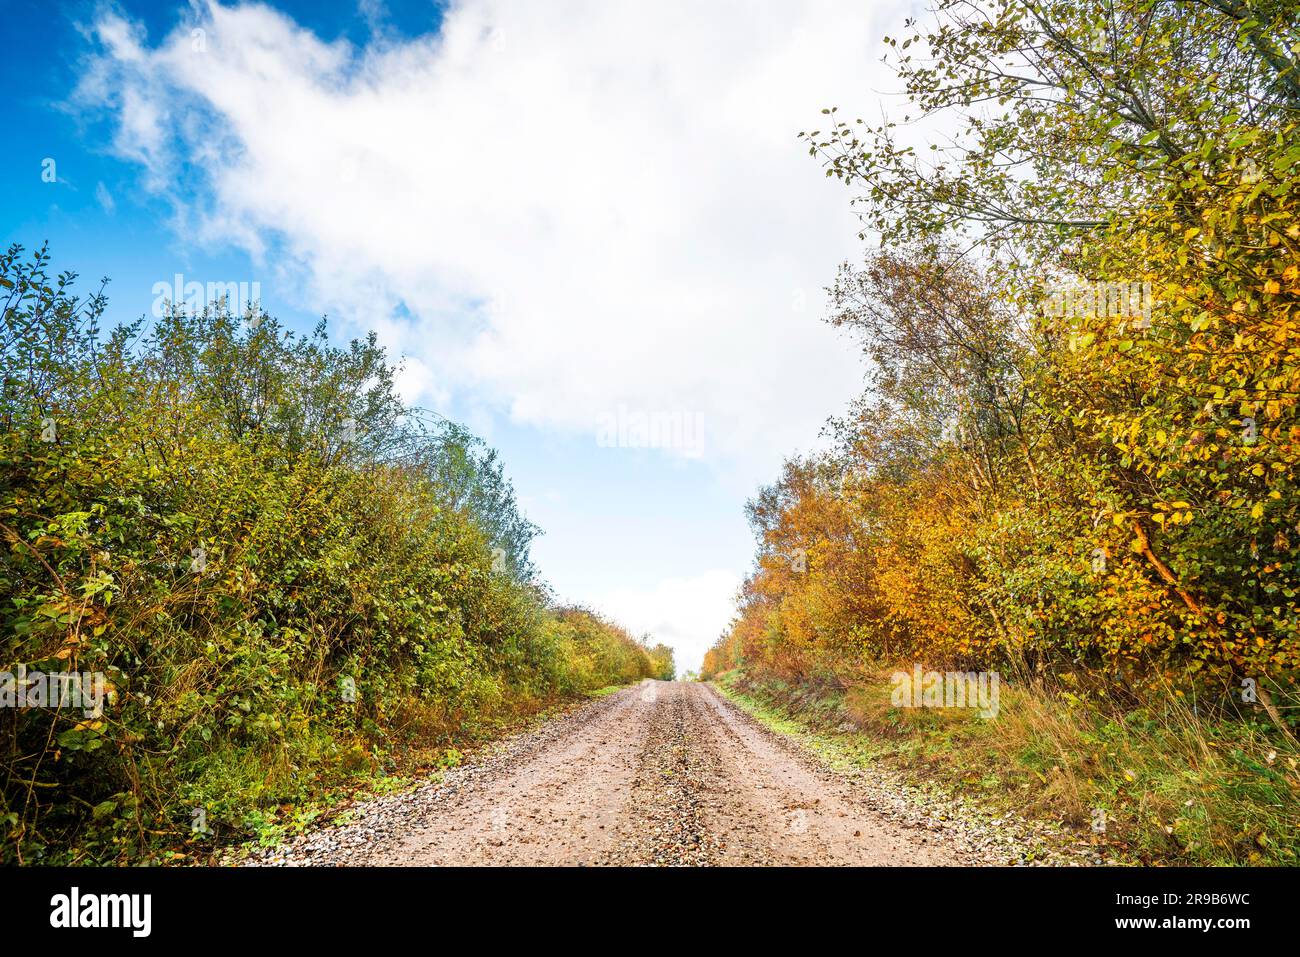 Autumn colors on trees by the roadside of a dirt trail in the fall under a blue sky with white clouds Stock Photo